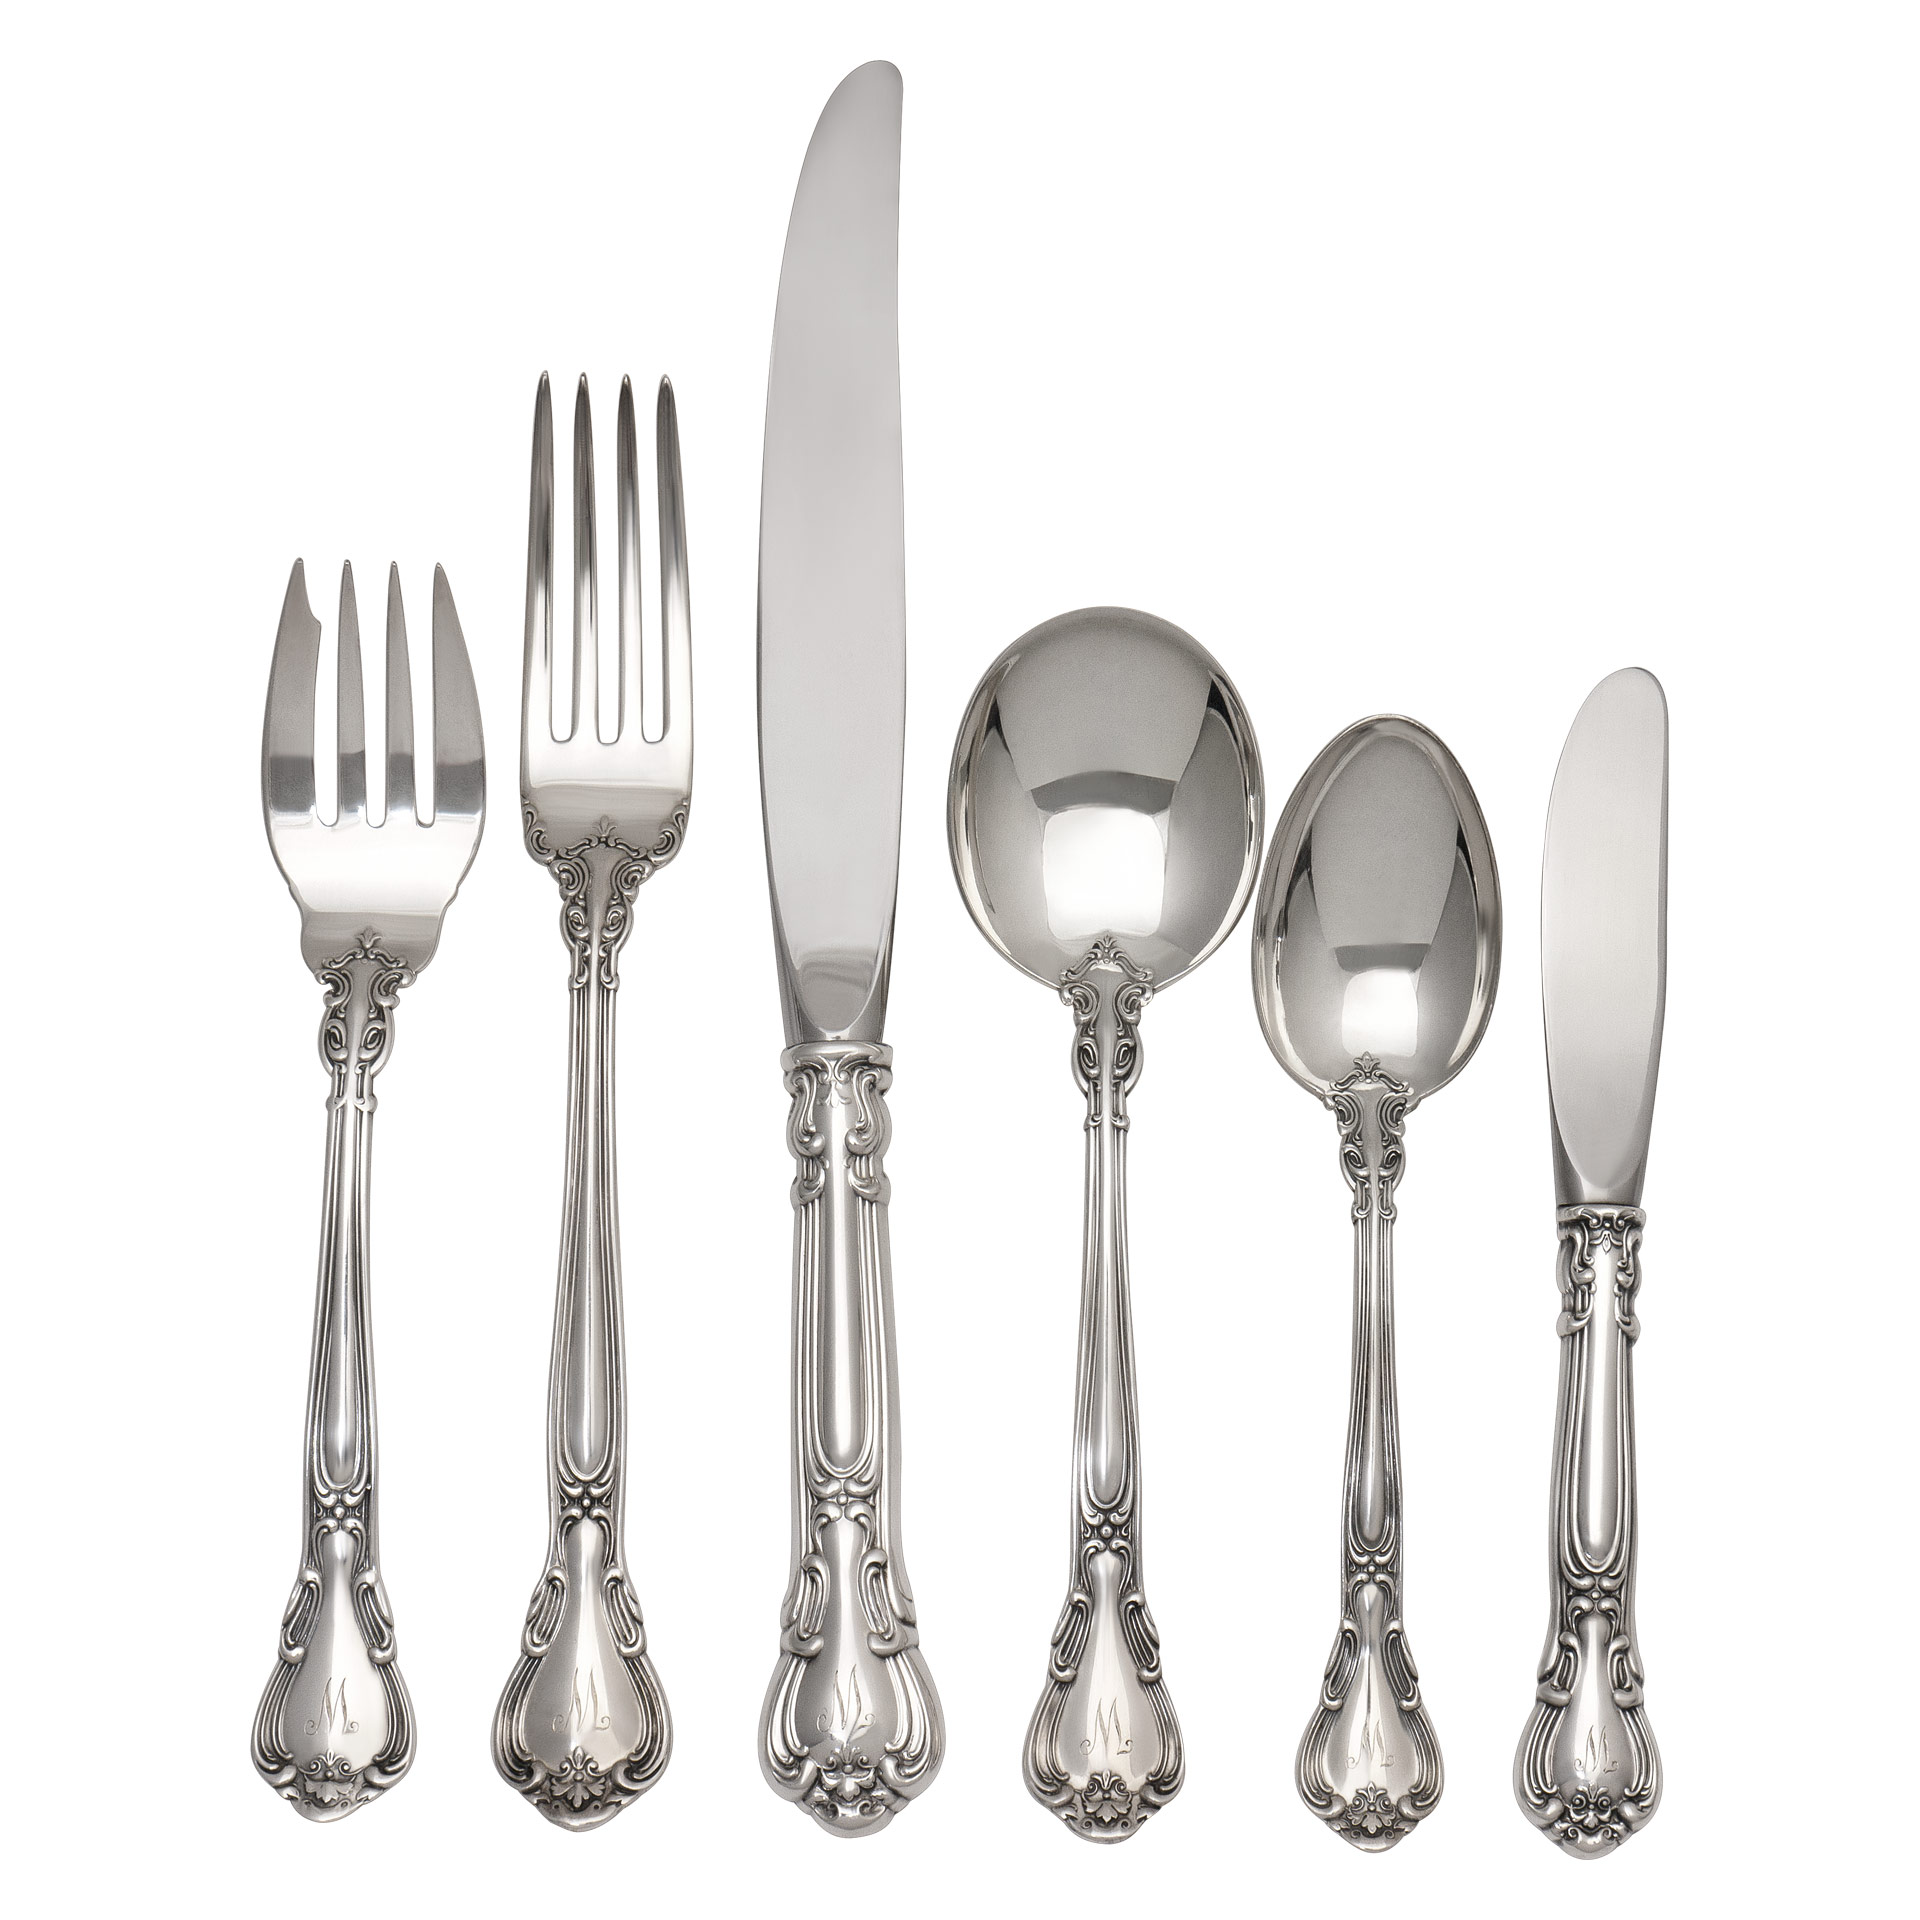  "Chantilly" Sterling Silver Flatware Set. Patented in 1895 by Gorham- 4 x 12 (incomplete) + 7 serving pieces- Over 2700 grams sterling silver.